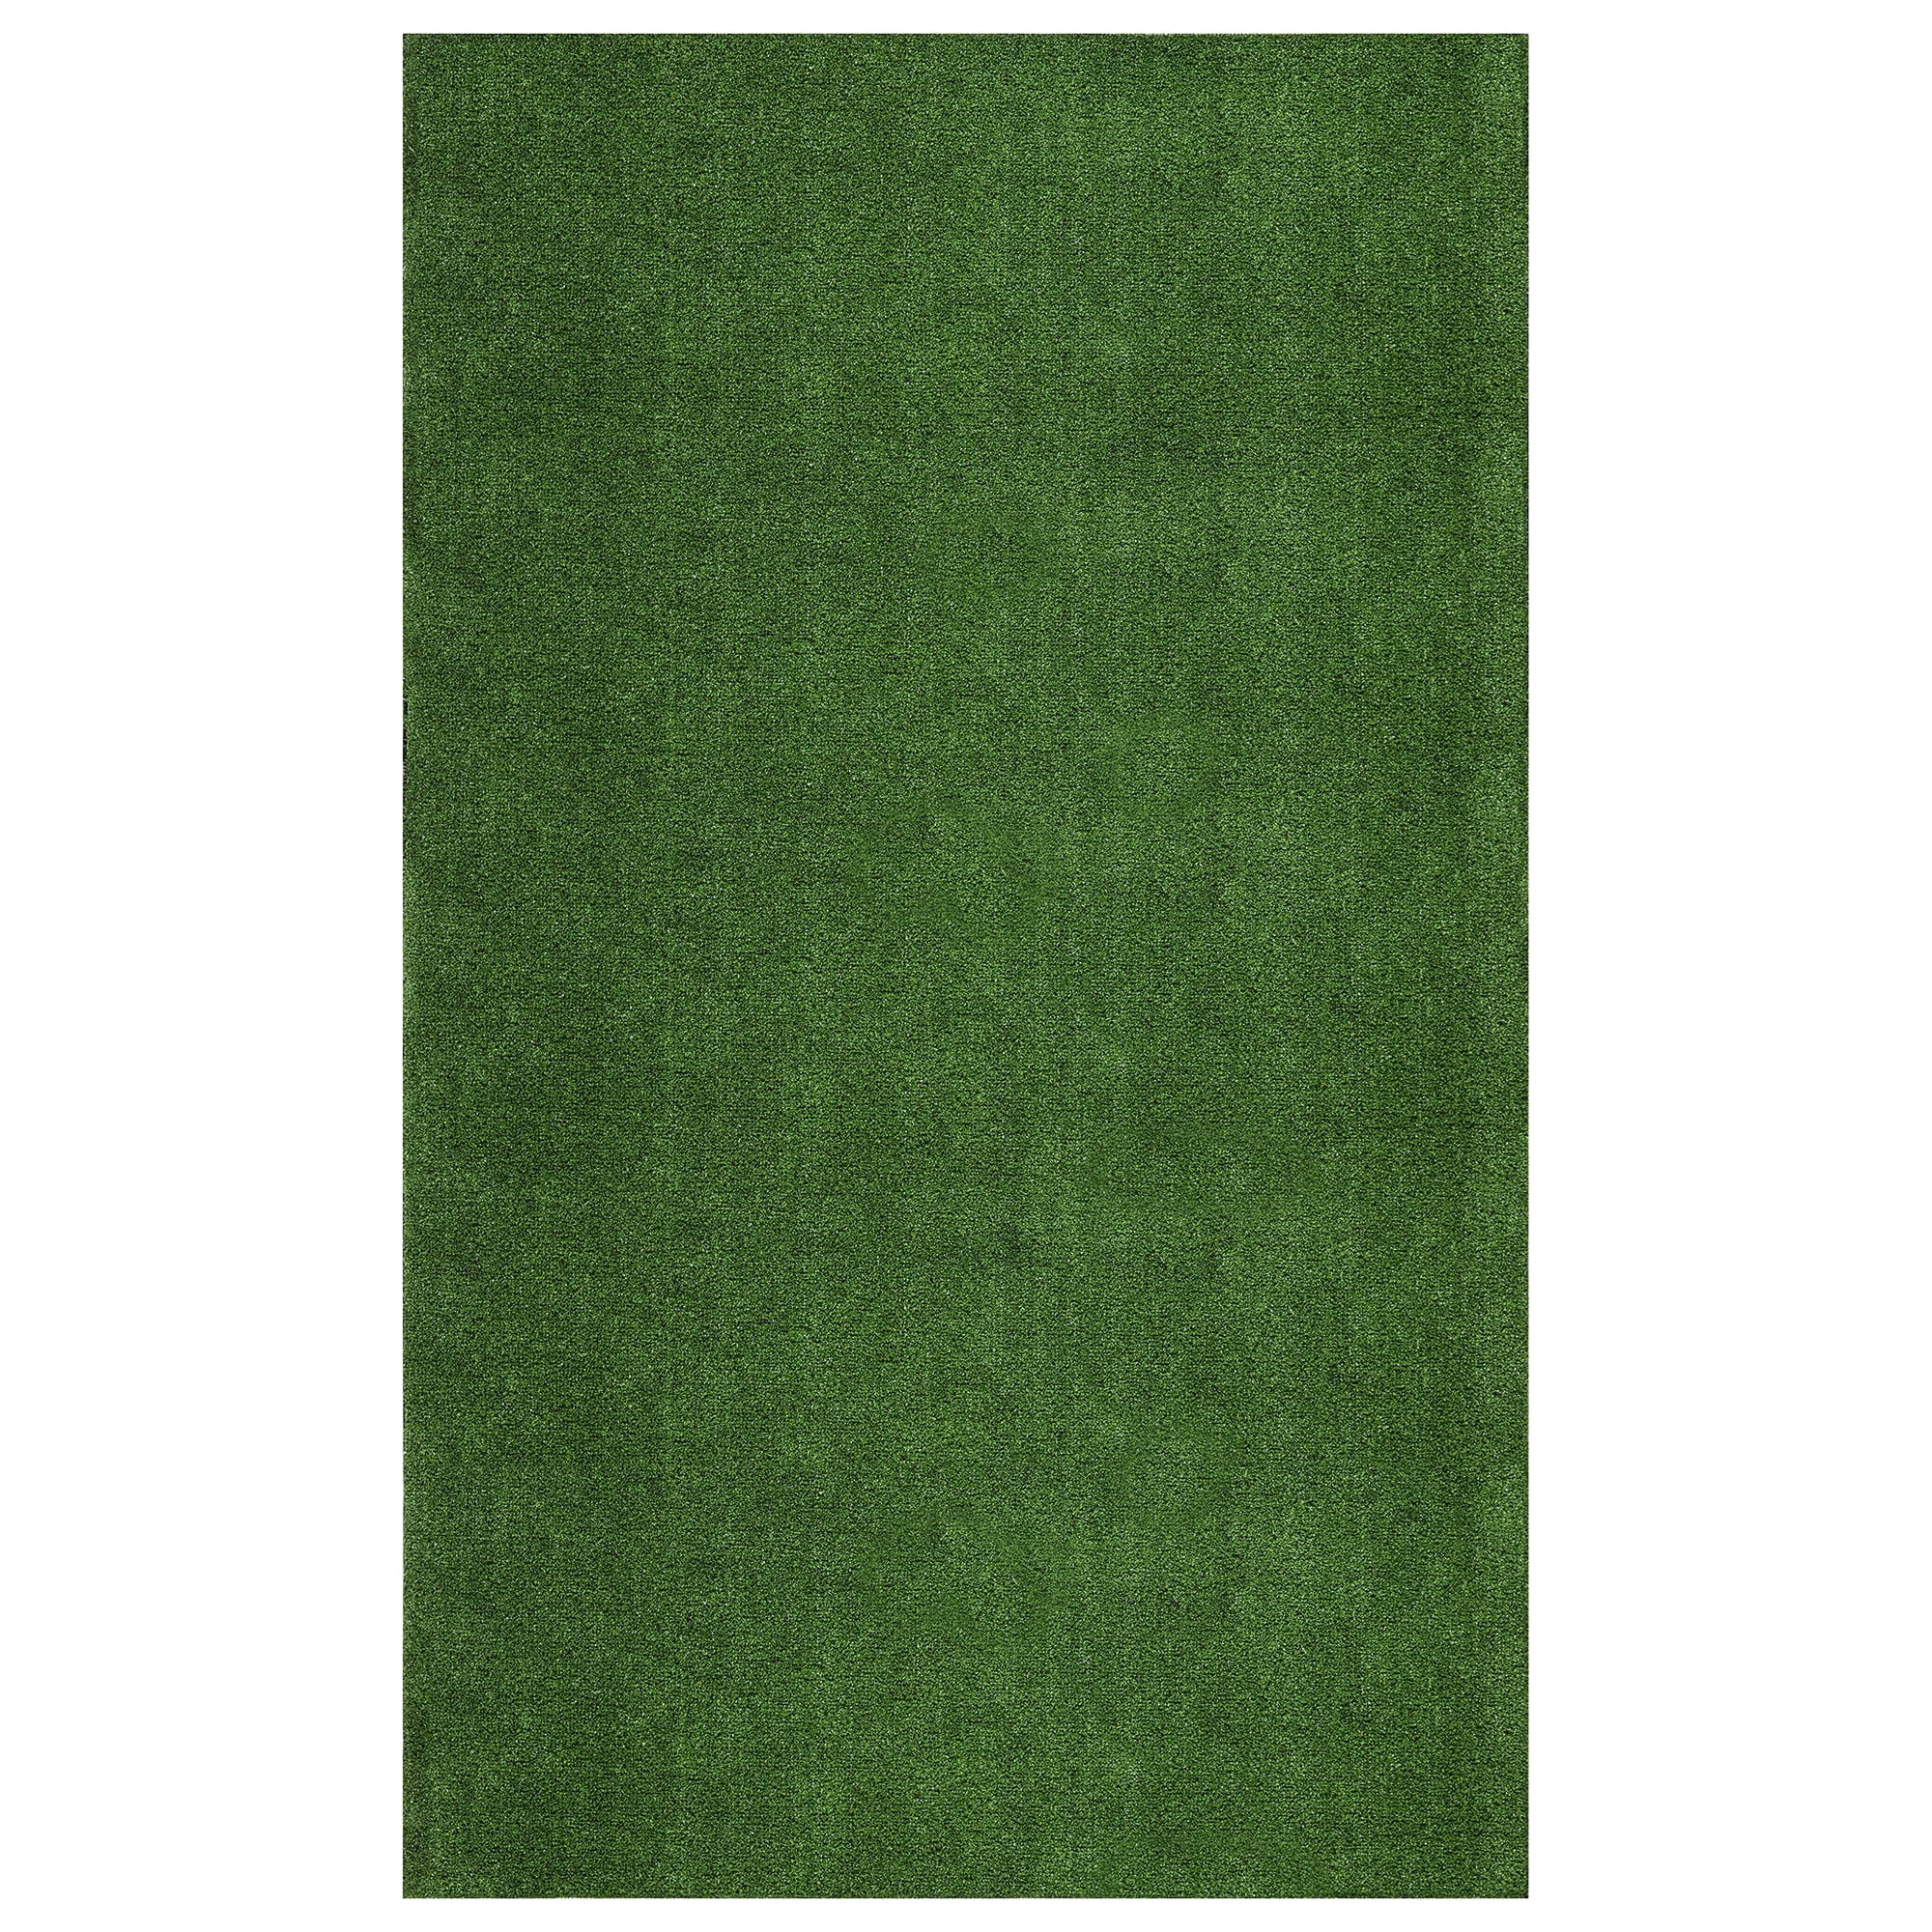 Ottomanson Turf Collection Waterproof Solid Grass 7x10 Indoor/Outdoor Artificial Grass Rug, 6 ft. 6 in. x 9 ft. 2 in., Green